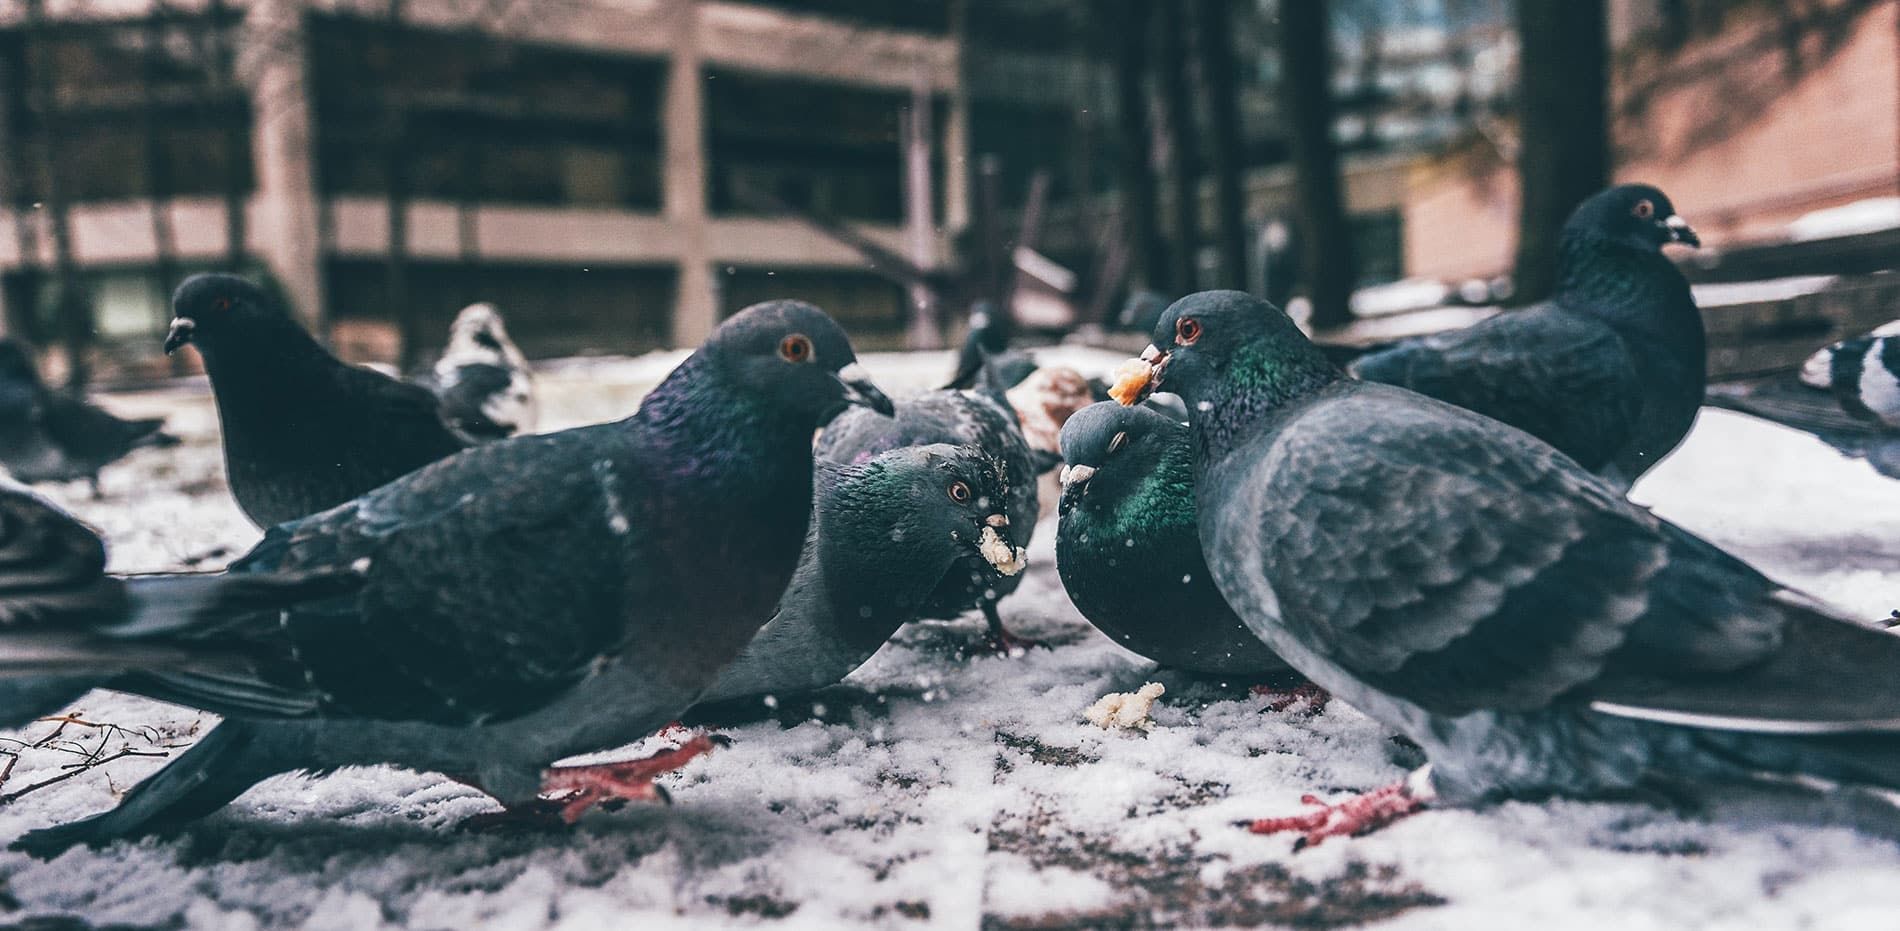 A flock of pigeons are eating food in the snow.